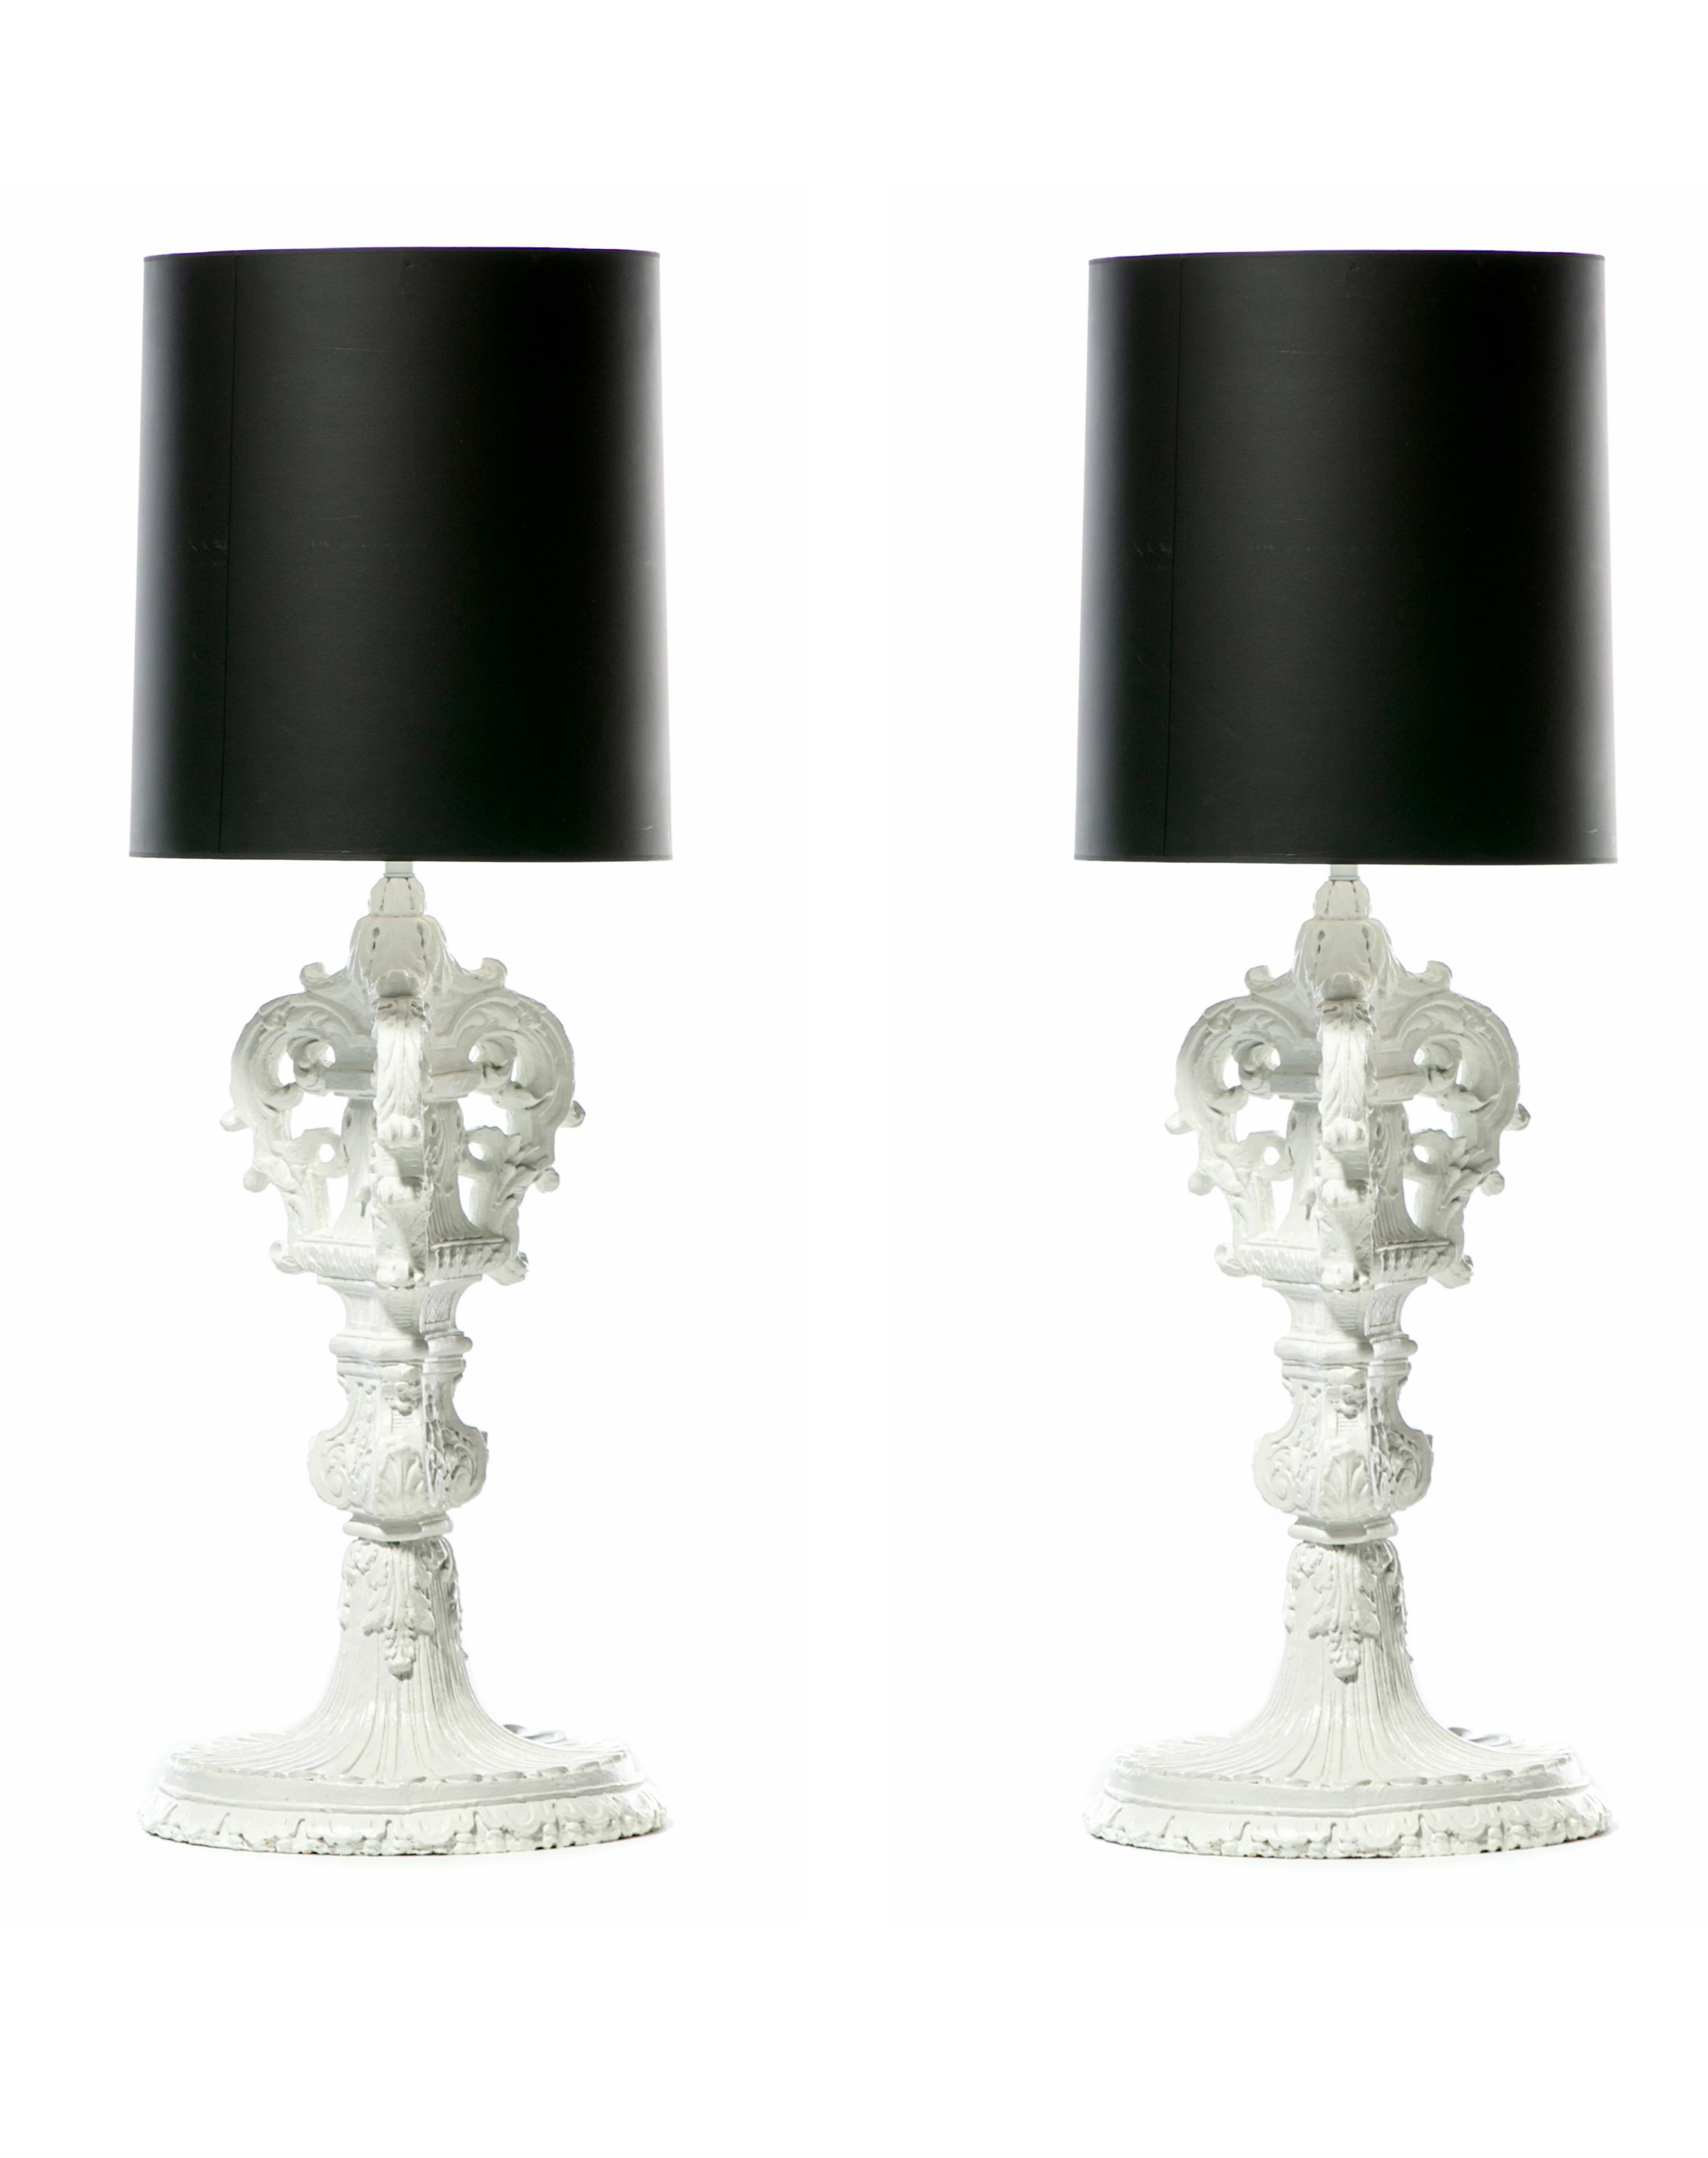 Pair of Large Hollywood Regency Baroque Plaster Lamps by Marge Carson c. 1960s For Sale 8